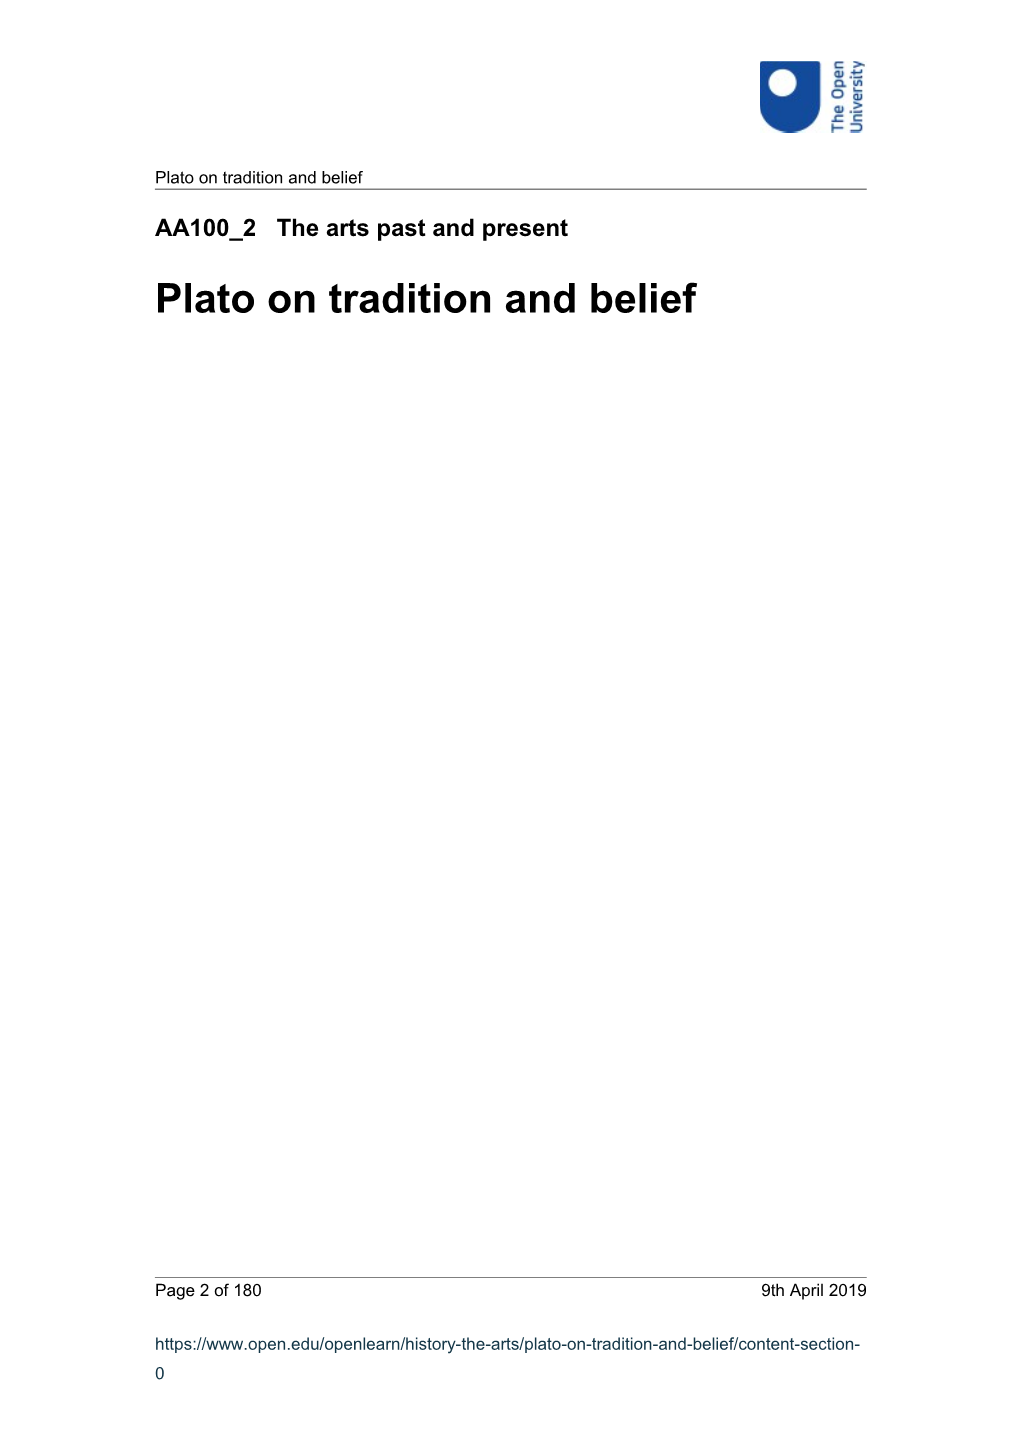 Plato on Tradition and Belief